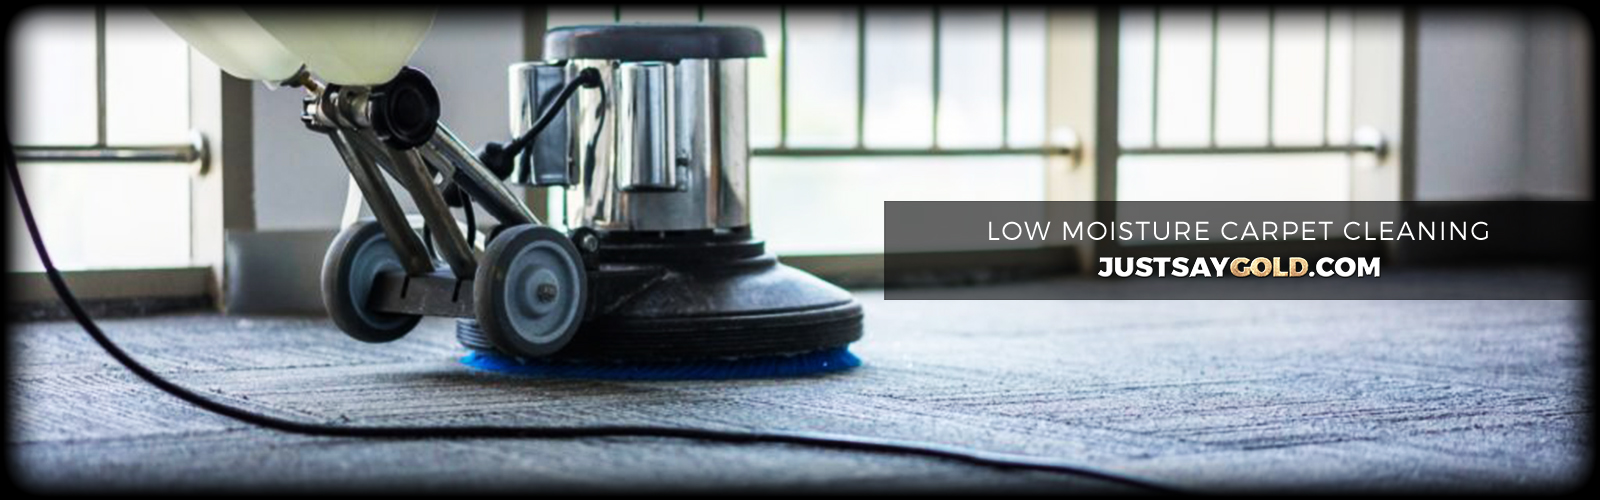 assets/images/causes/slider/best-commercial-office-carpet-cleaning-method-low-moisture-cleaning